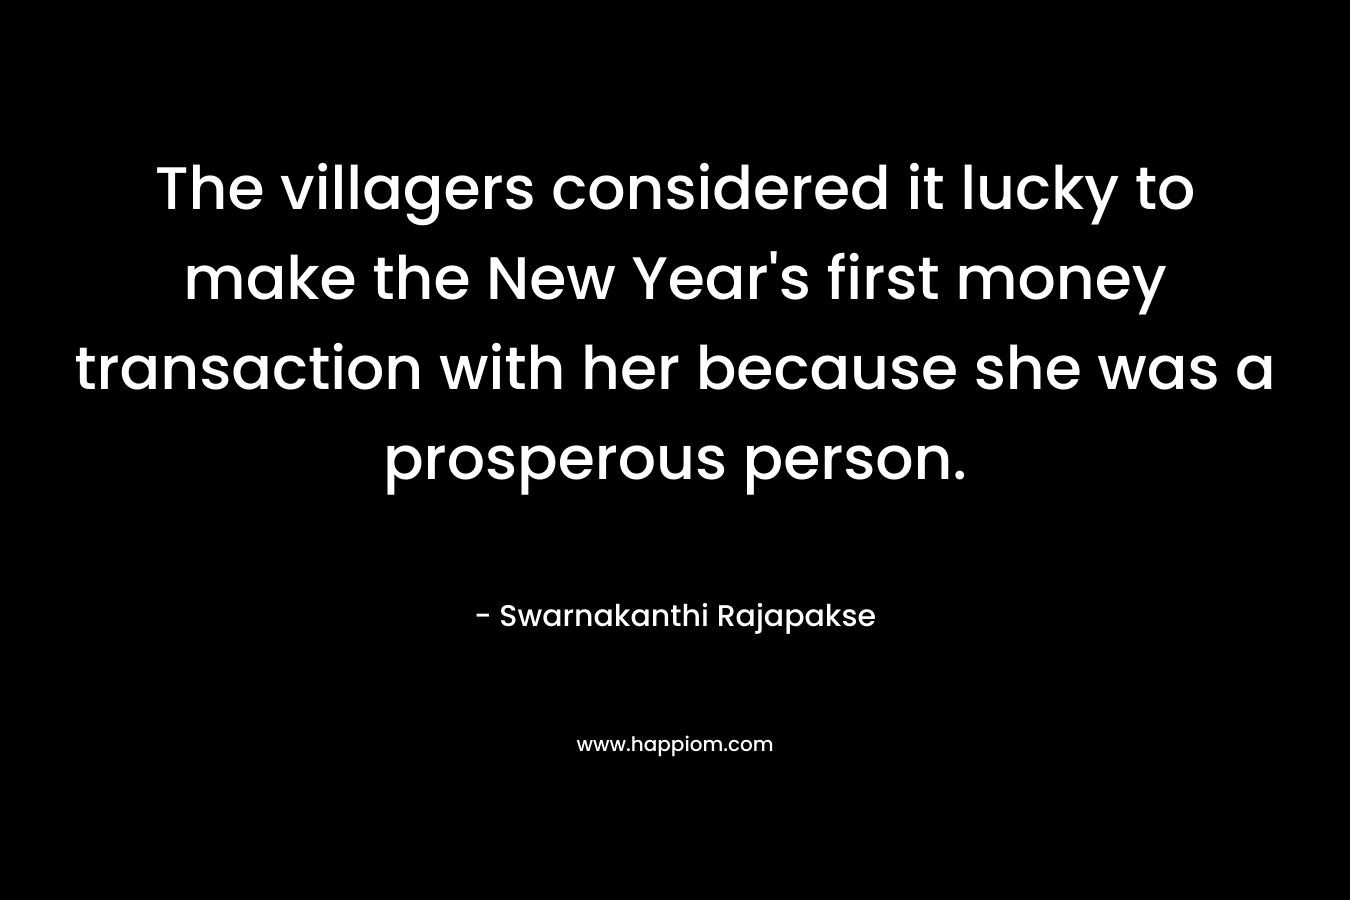 The villagers considered it lucky to make the New Year’s first money transaction with her because she was a prosperous person. – Swarnakanthi Rajapakse